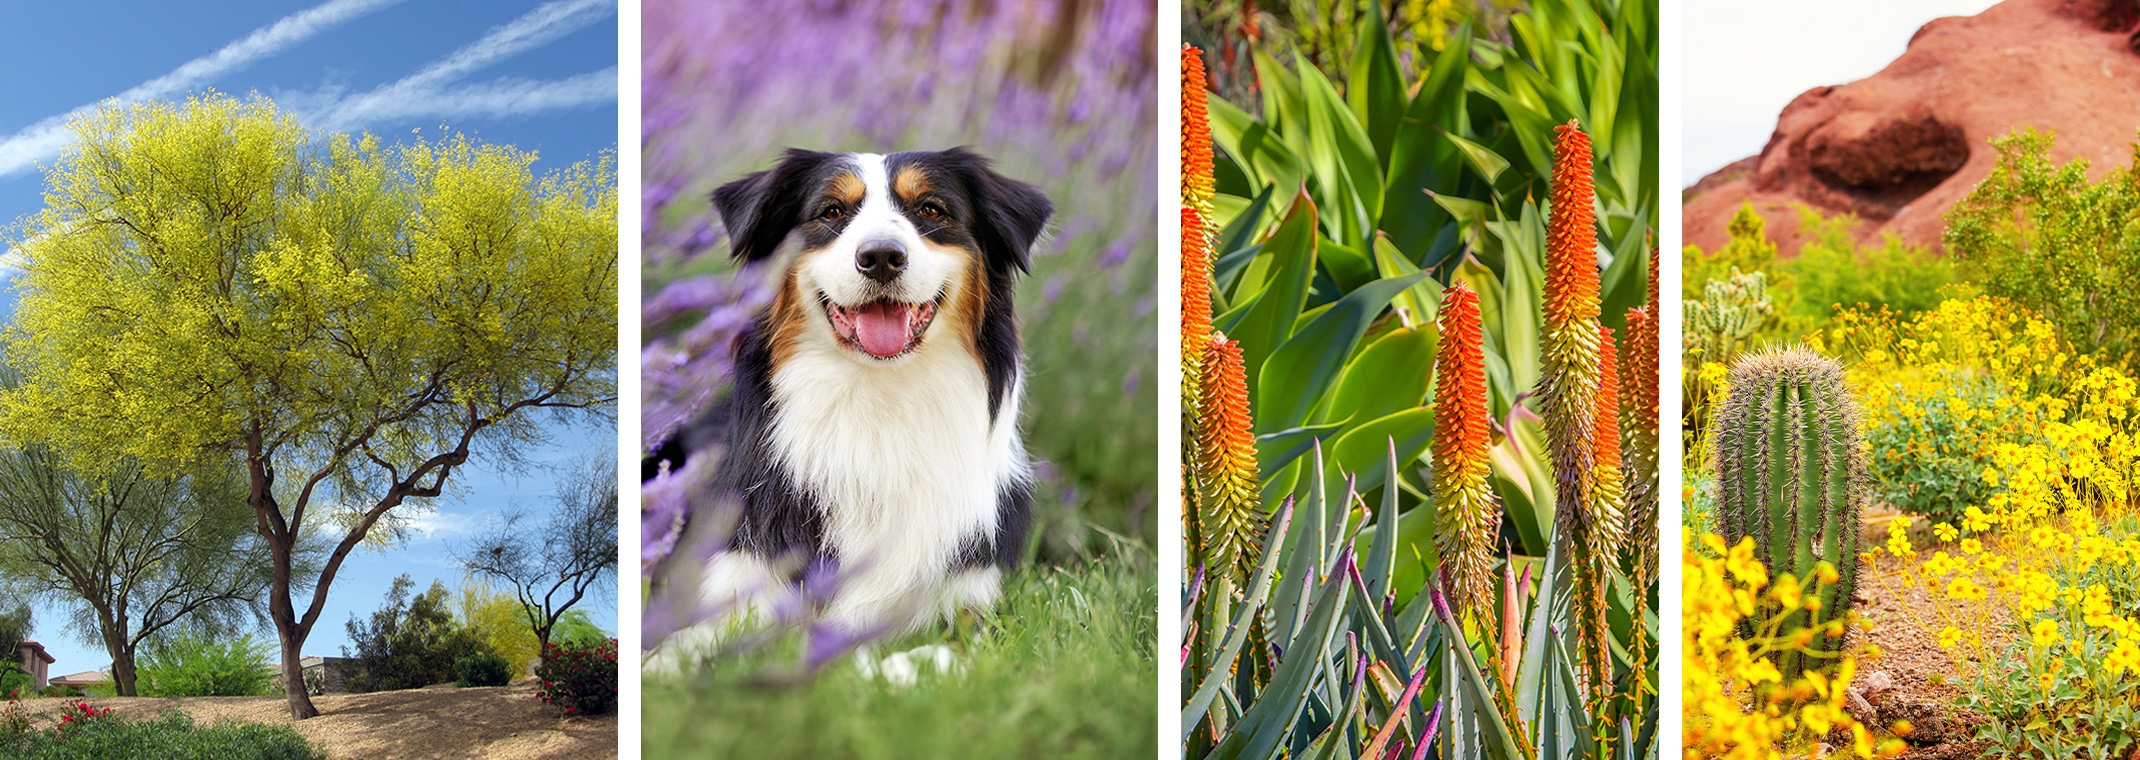 A desert tree, a dog on a lawn near lavender, blooming aloes and agaves, desert landscape with shrubs, yellow flowers and cacti.